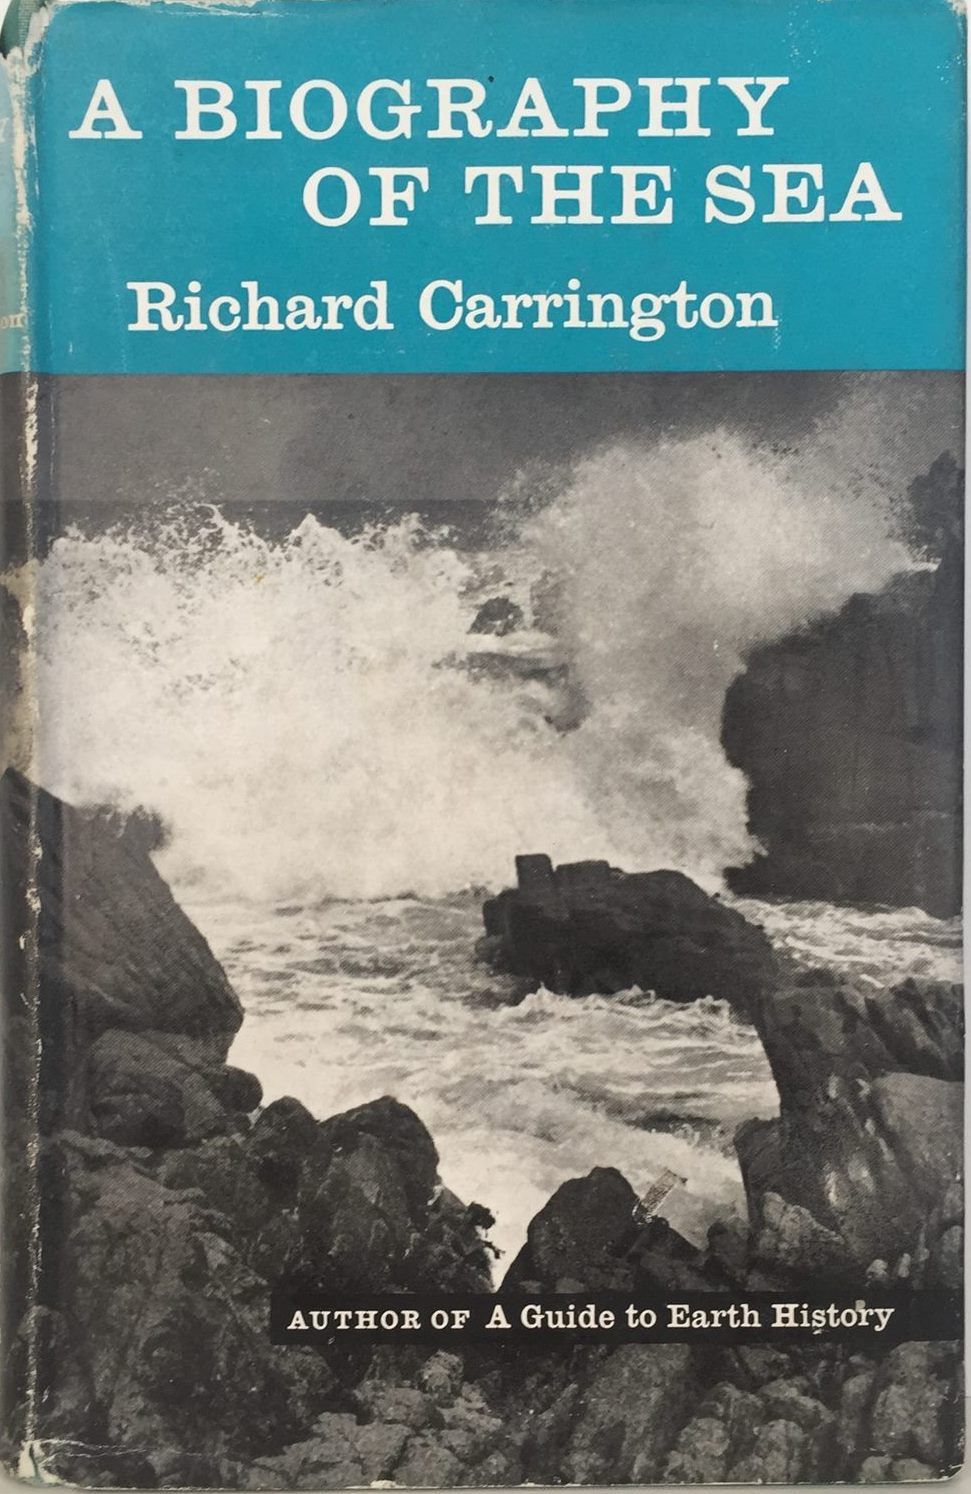 A BIOGRAPHY OF THE SEA